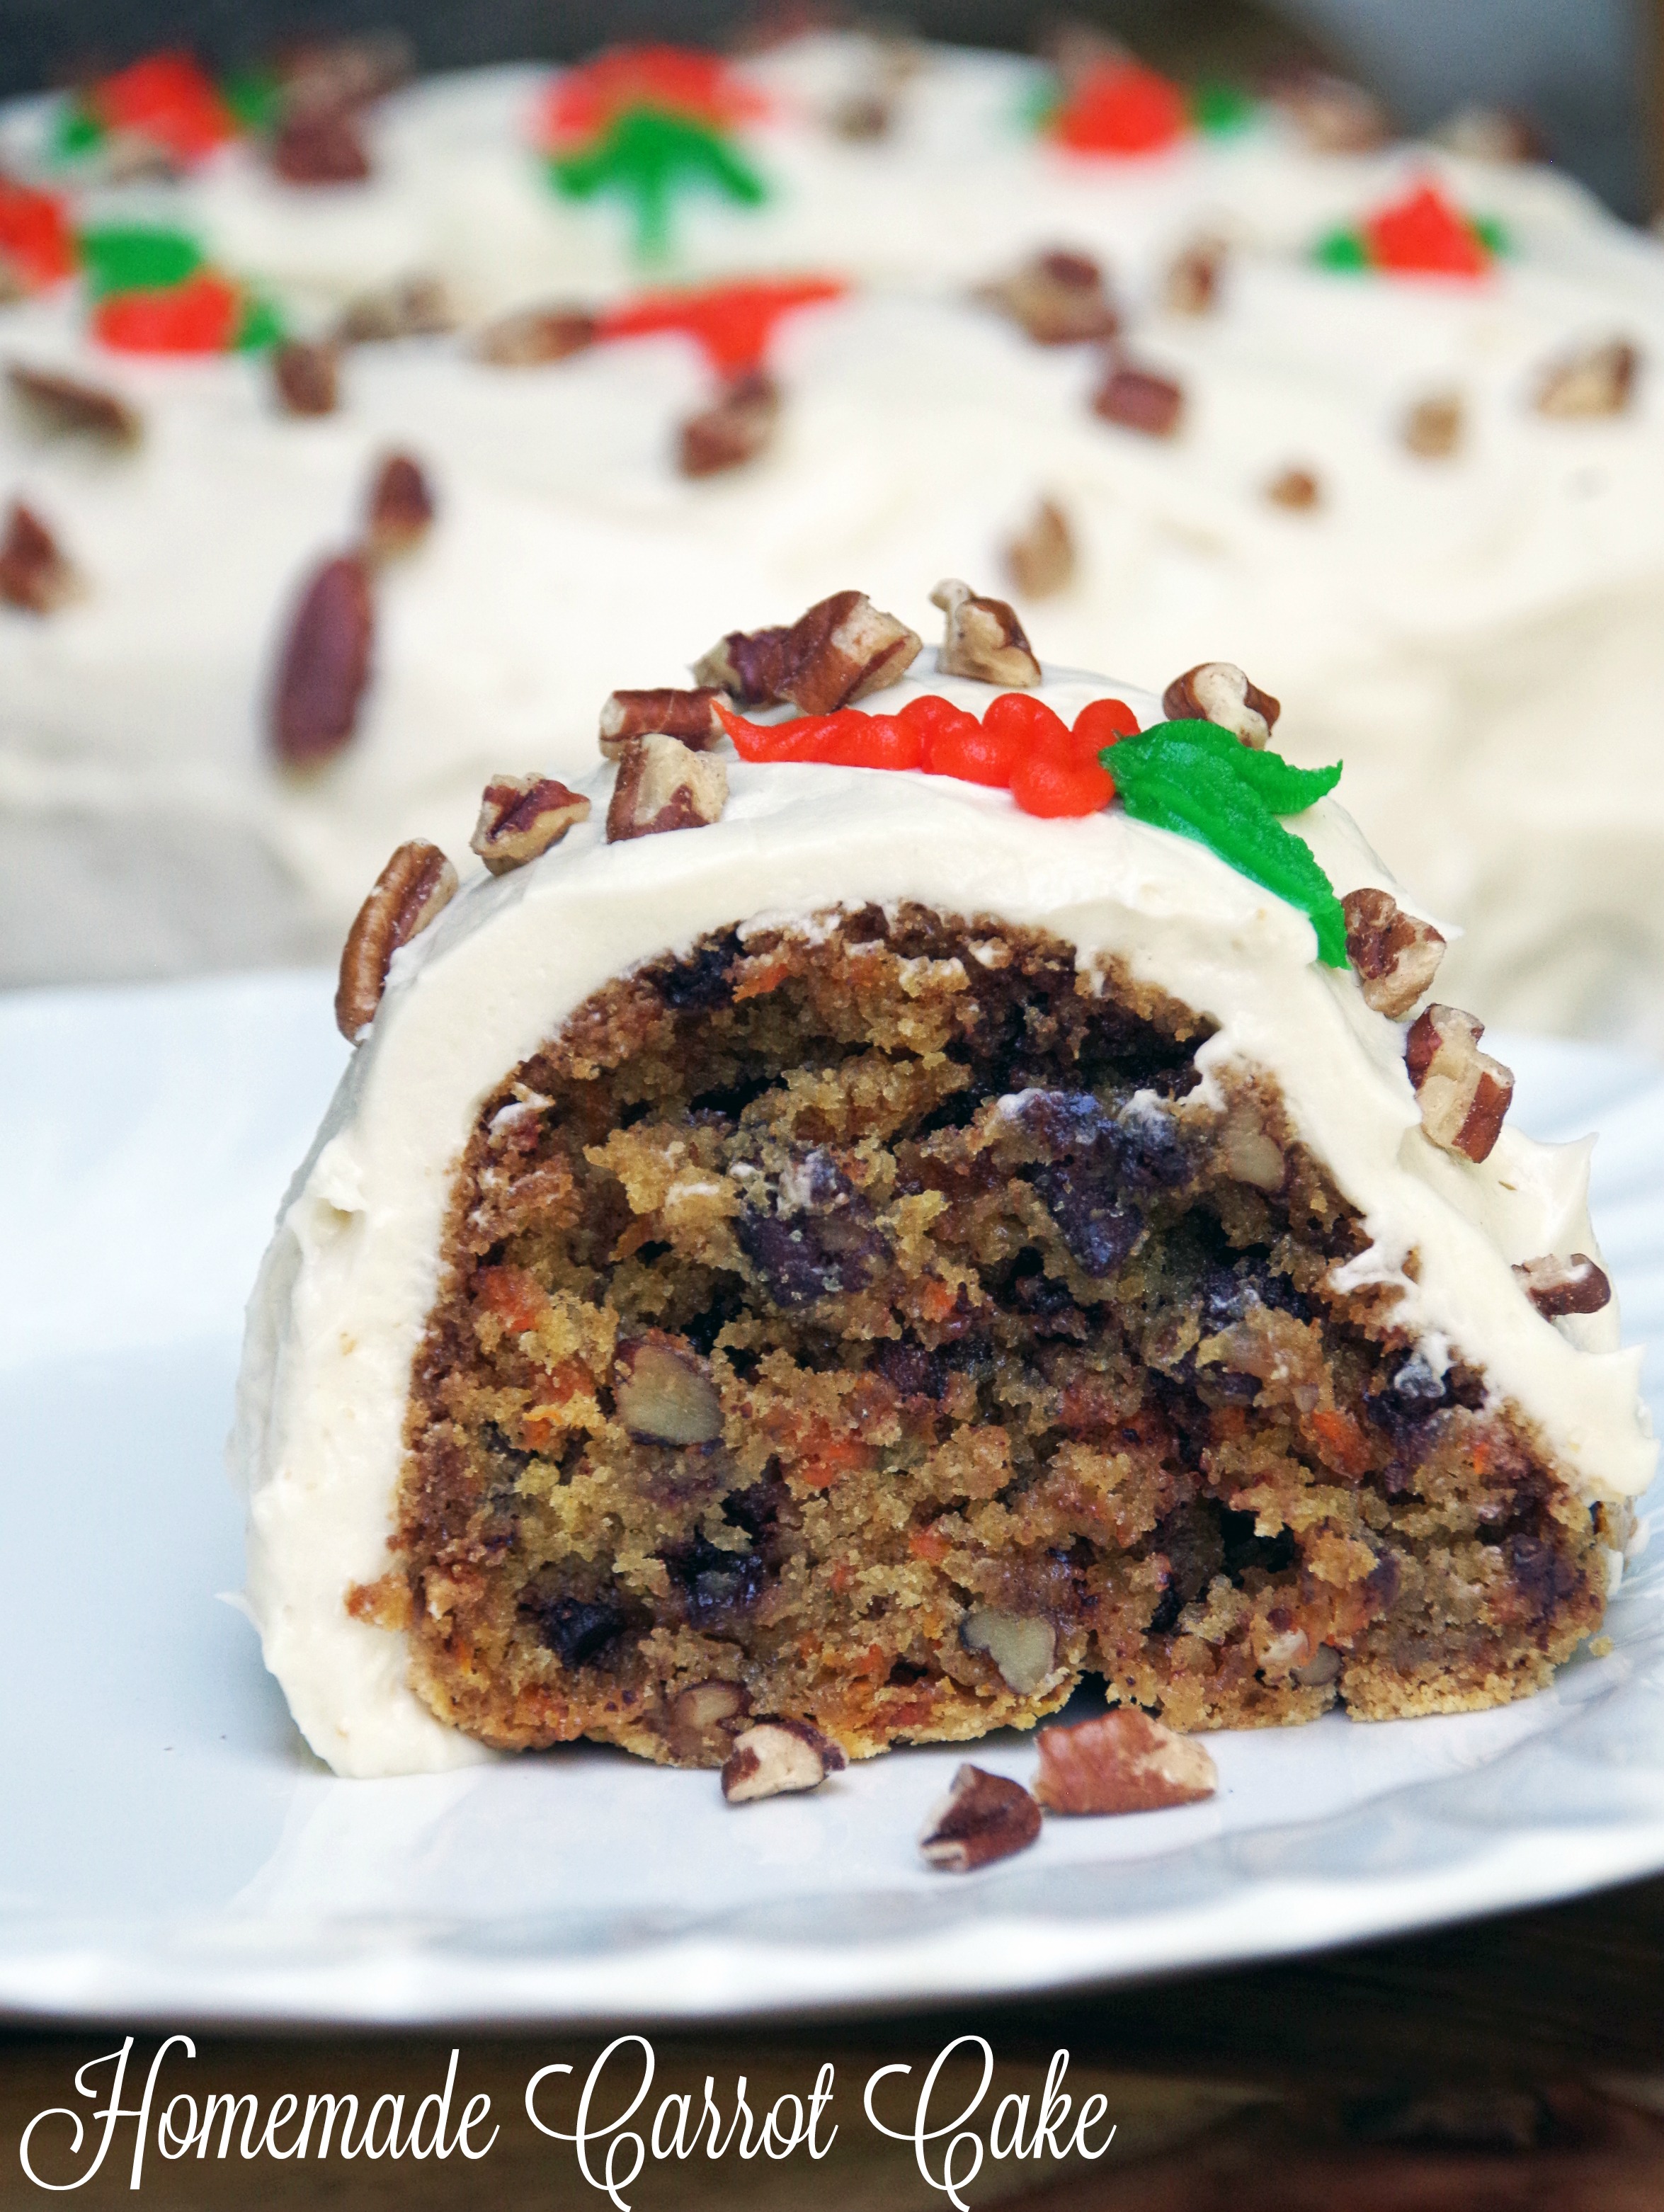 Homemade Carrot Cake from Scratch with Chocolate Chips 2